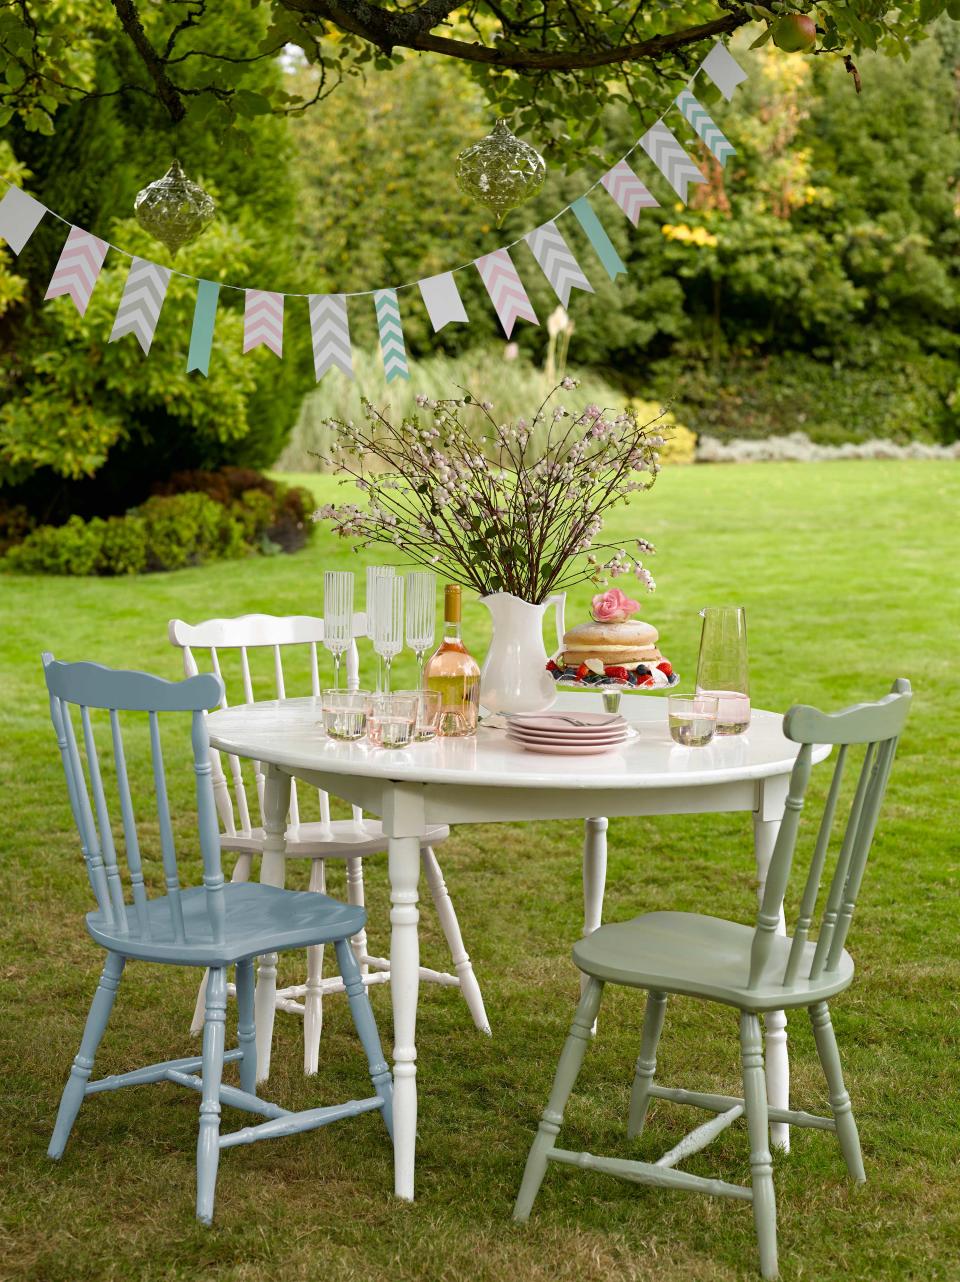 ADD A LICK OF PAINT TO YOUR TABLES AND CHAIRS